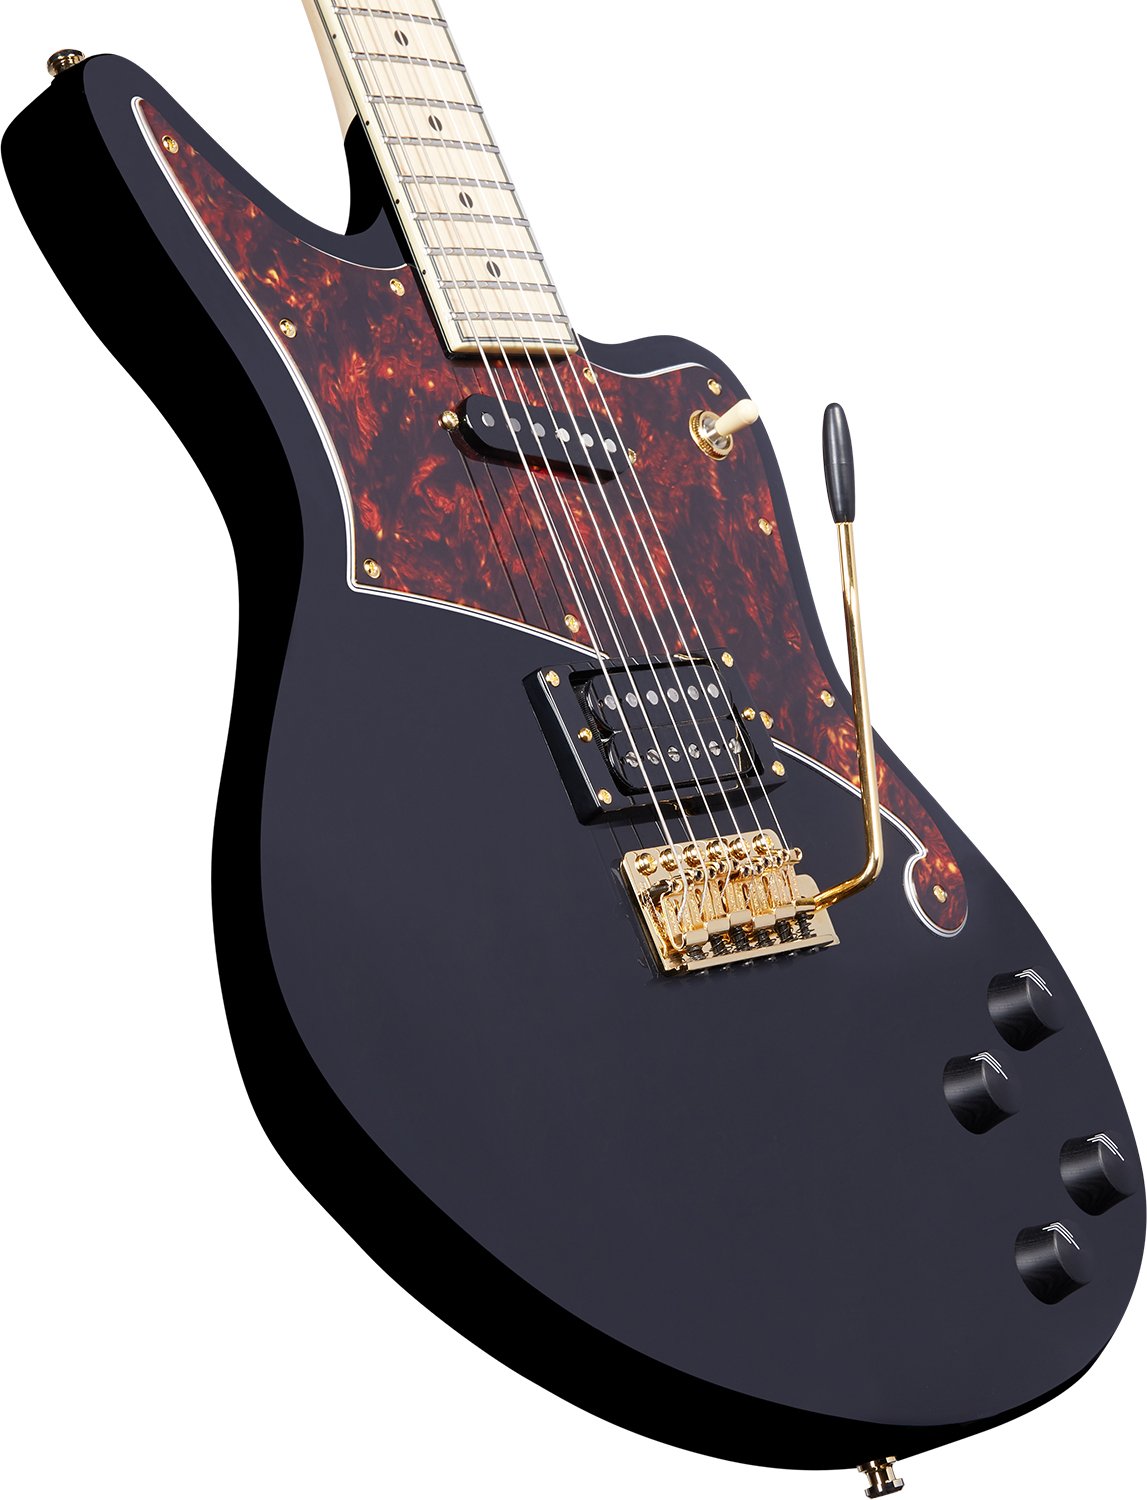 Deluxe Bedford Black with Maple Fingerboard and Tremolo bodyup